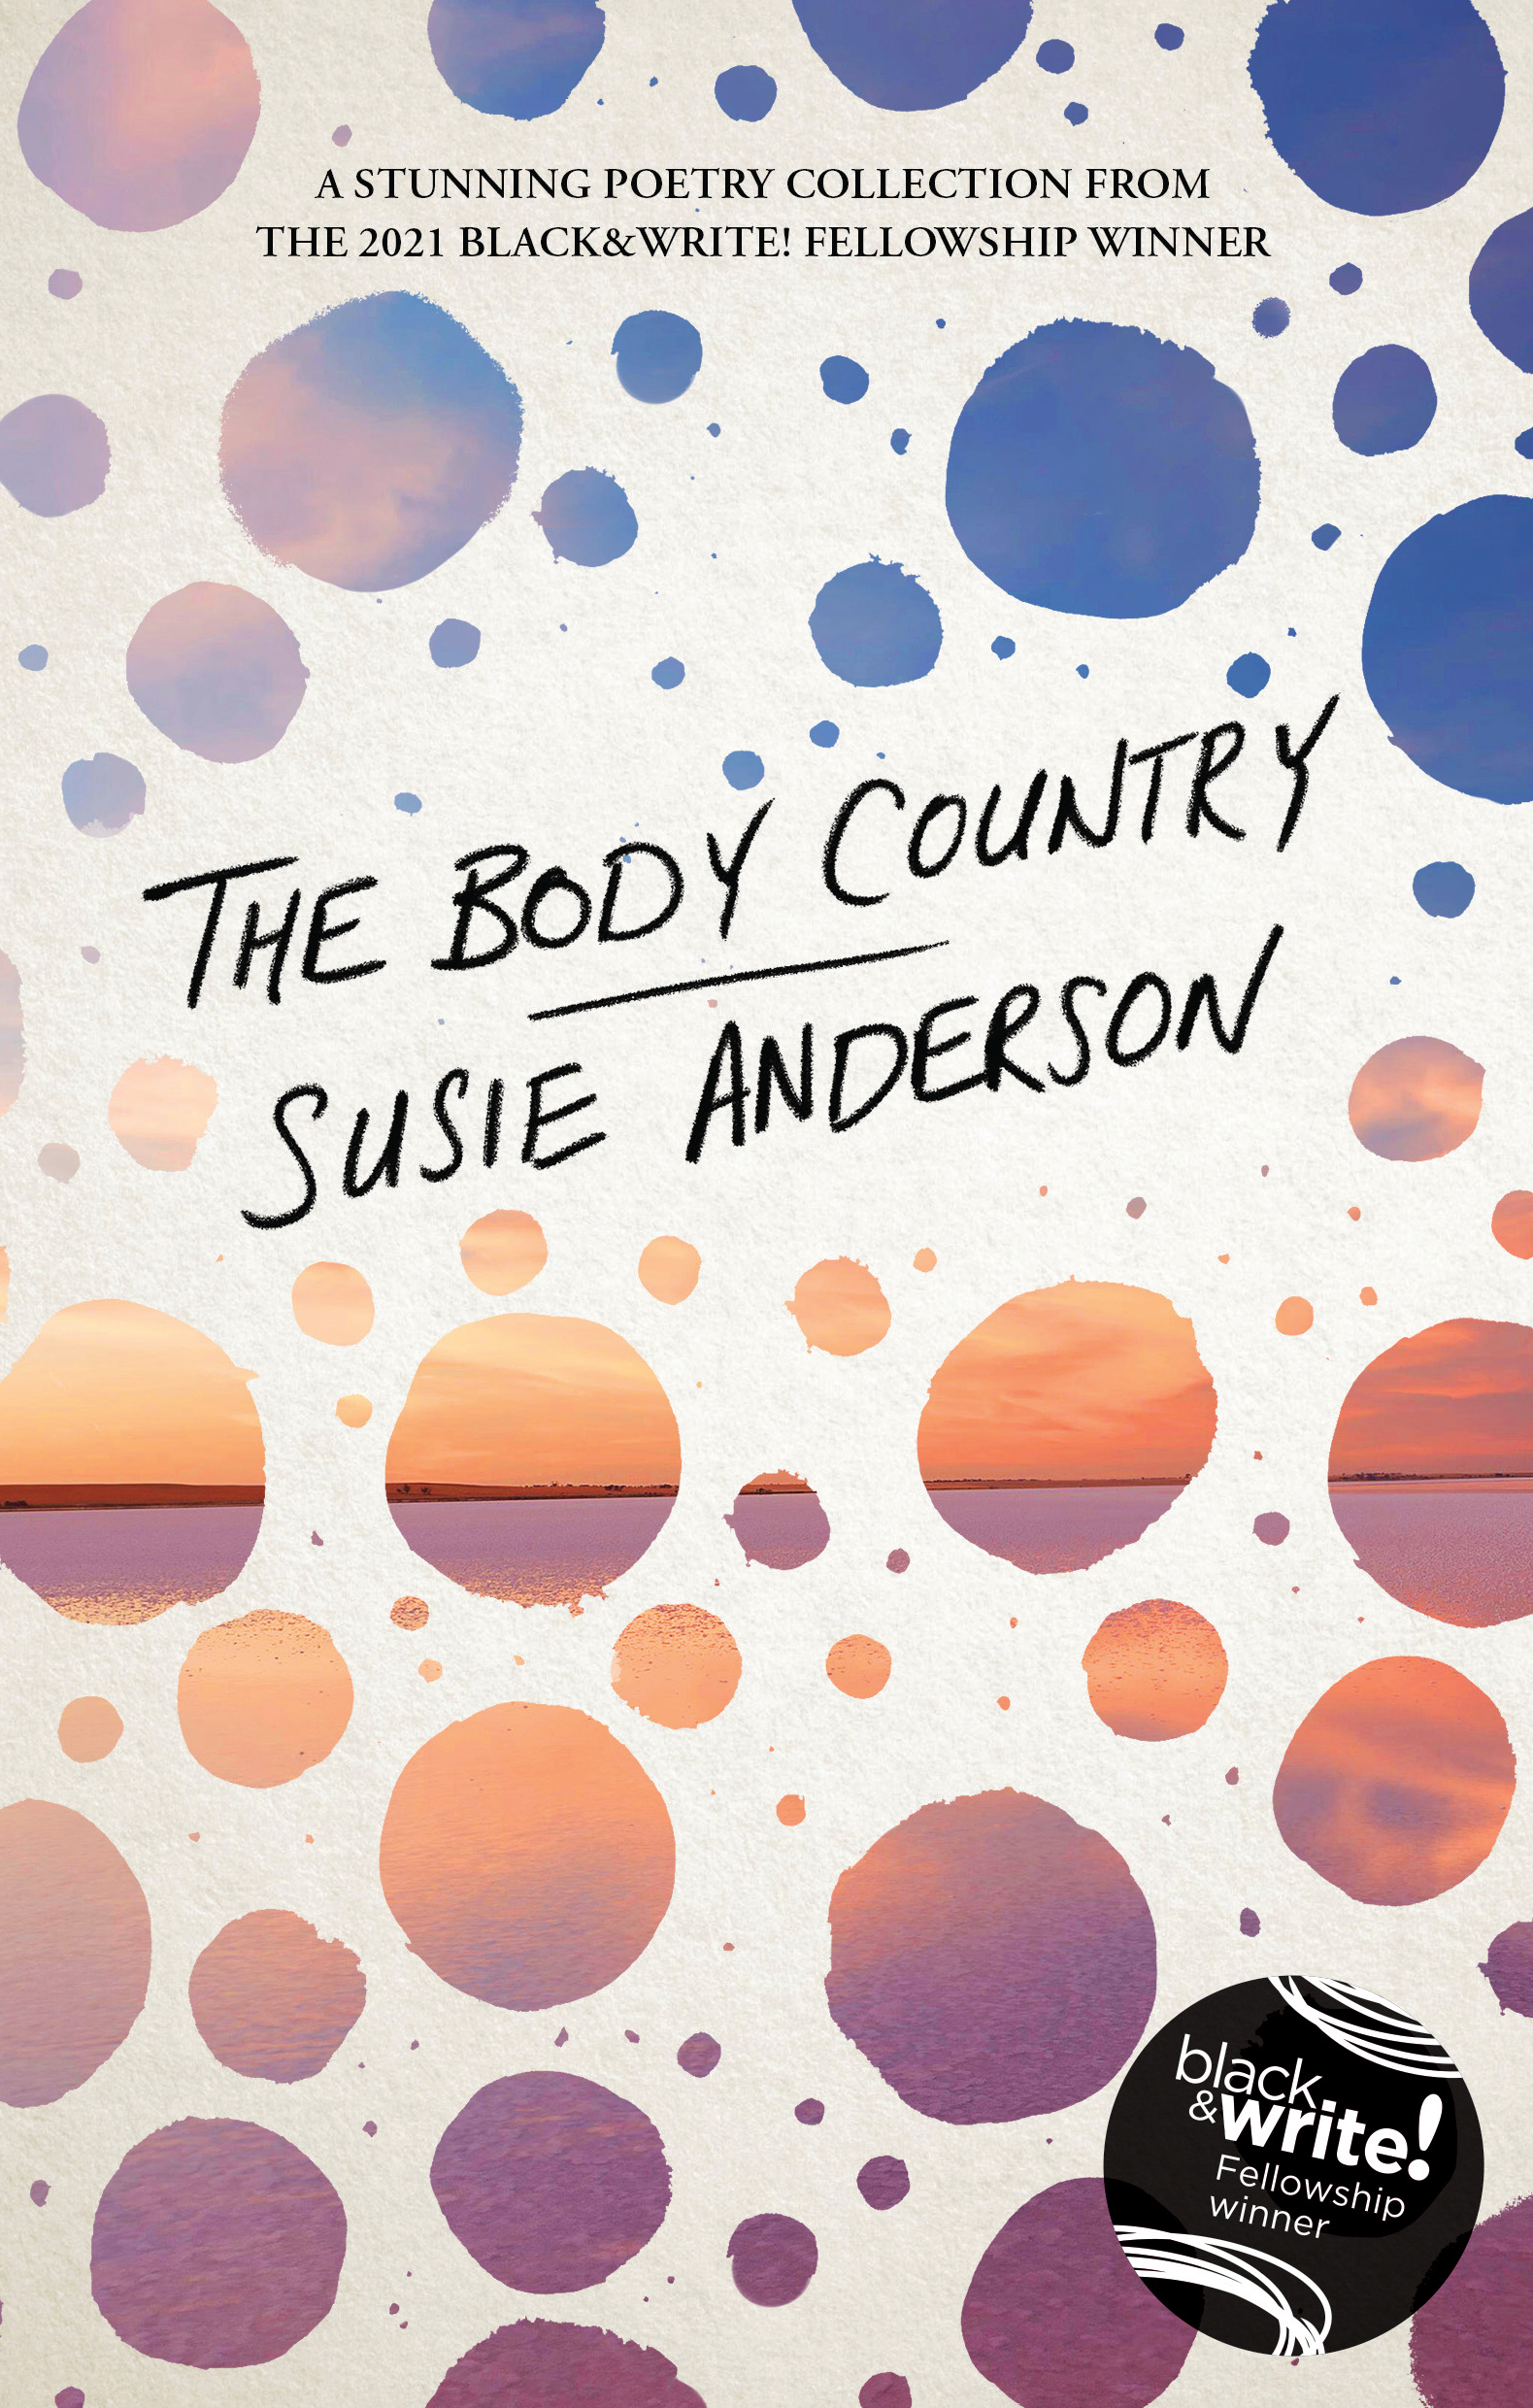 Cover of the body country by Susie Anderson which is white with blue and orange watercolour dots